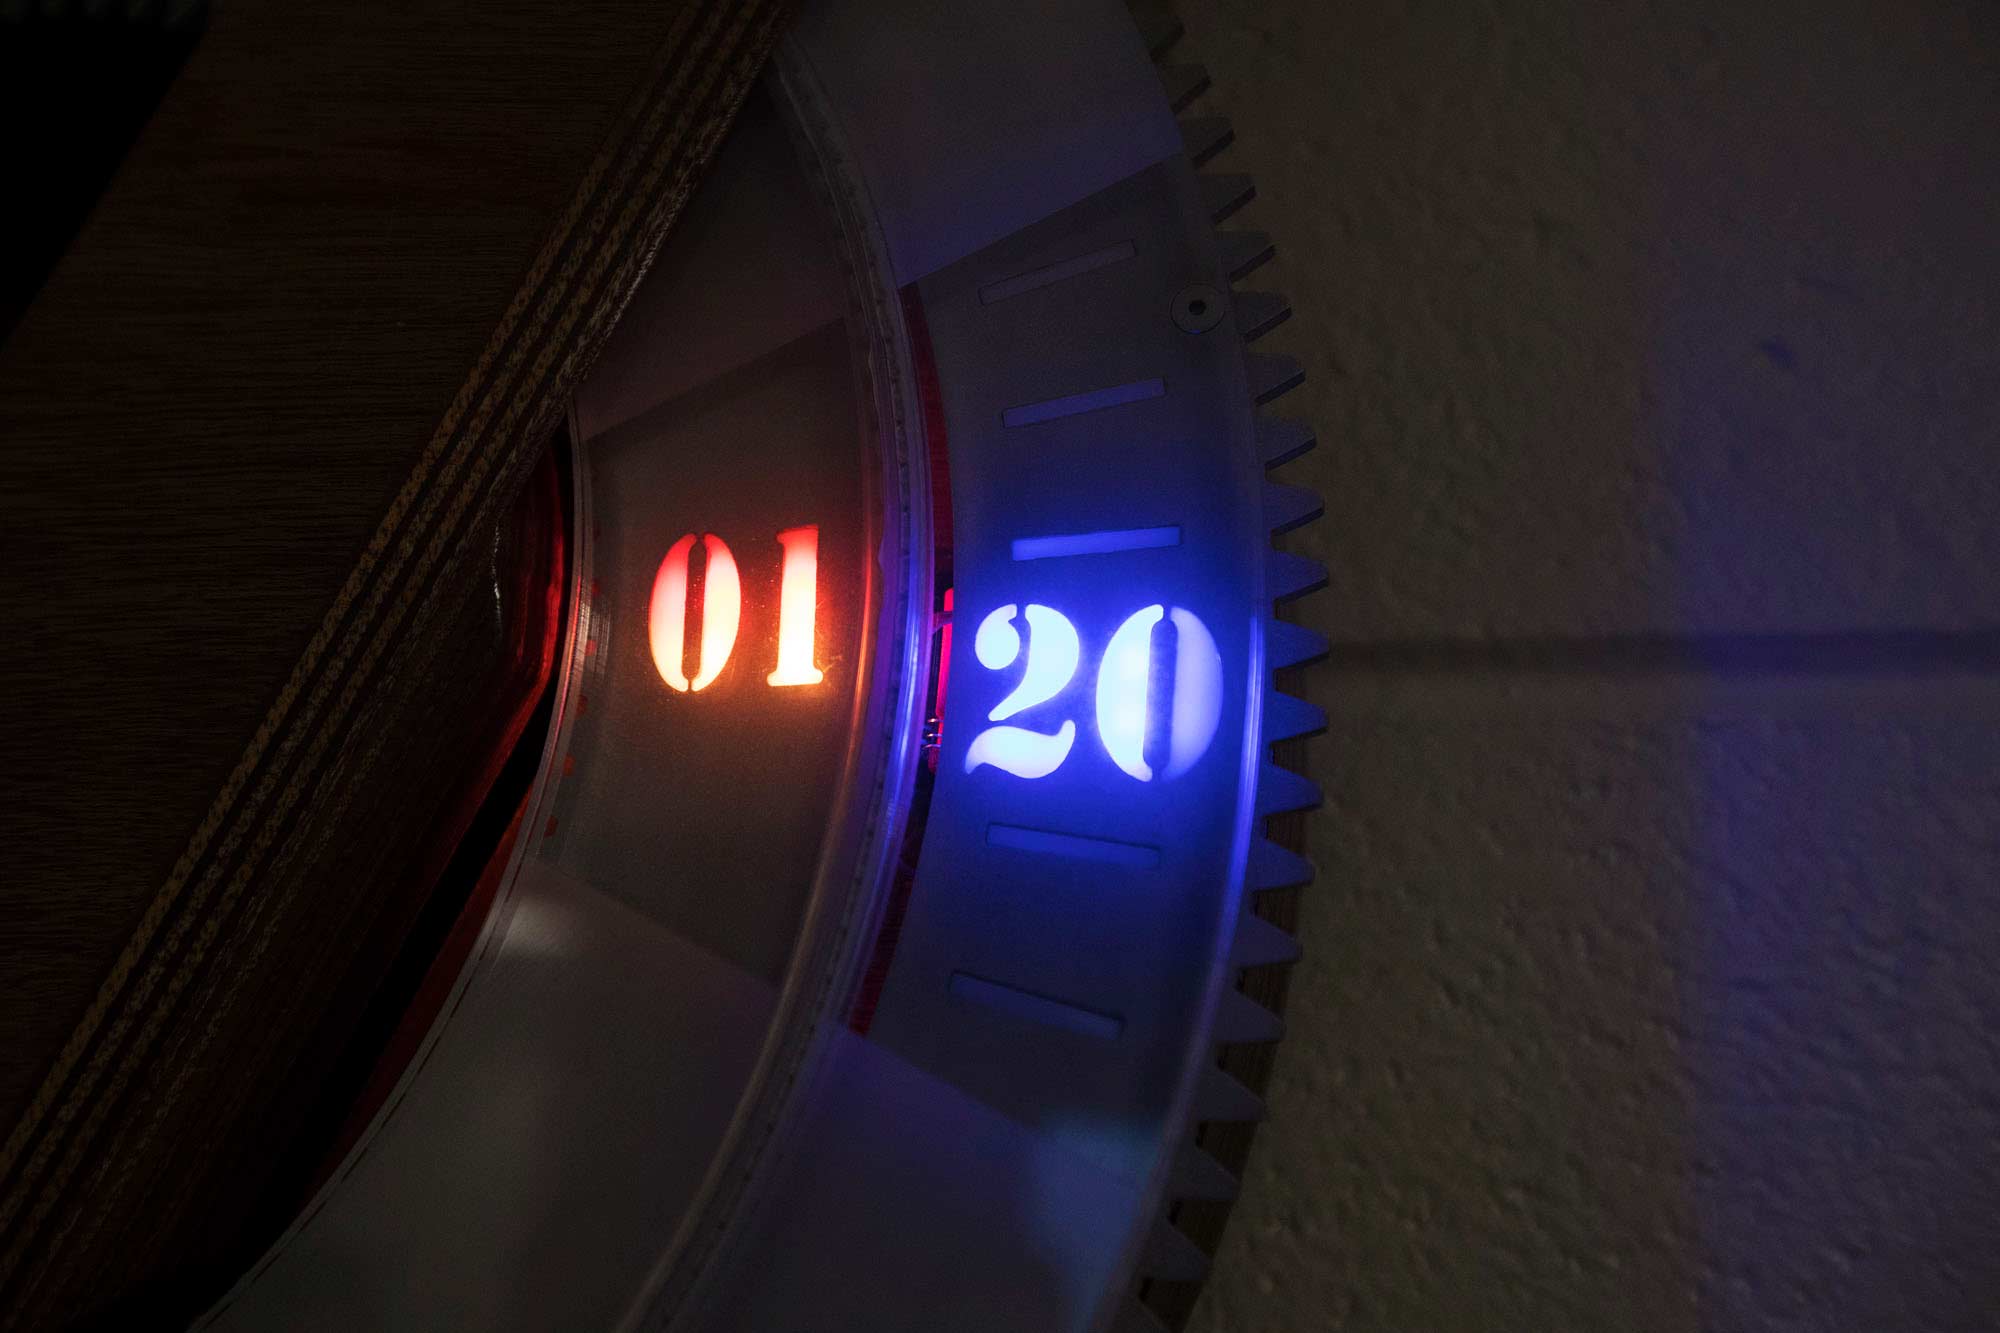 Close up of the clock displaying the time 1:20.